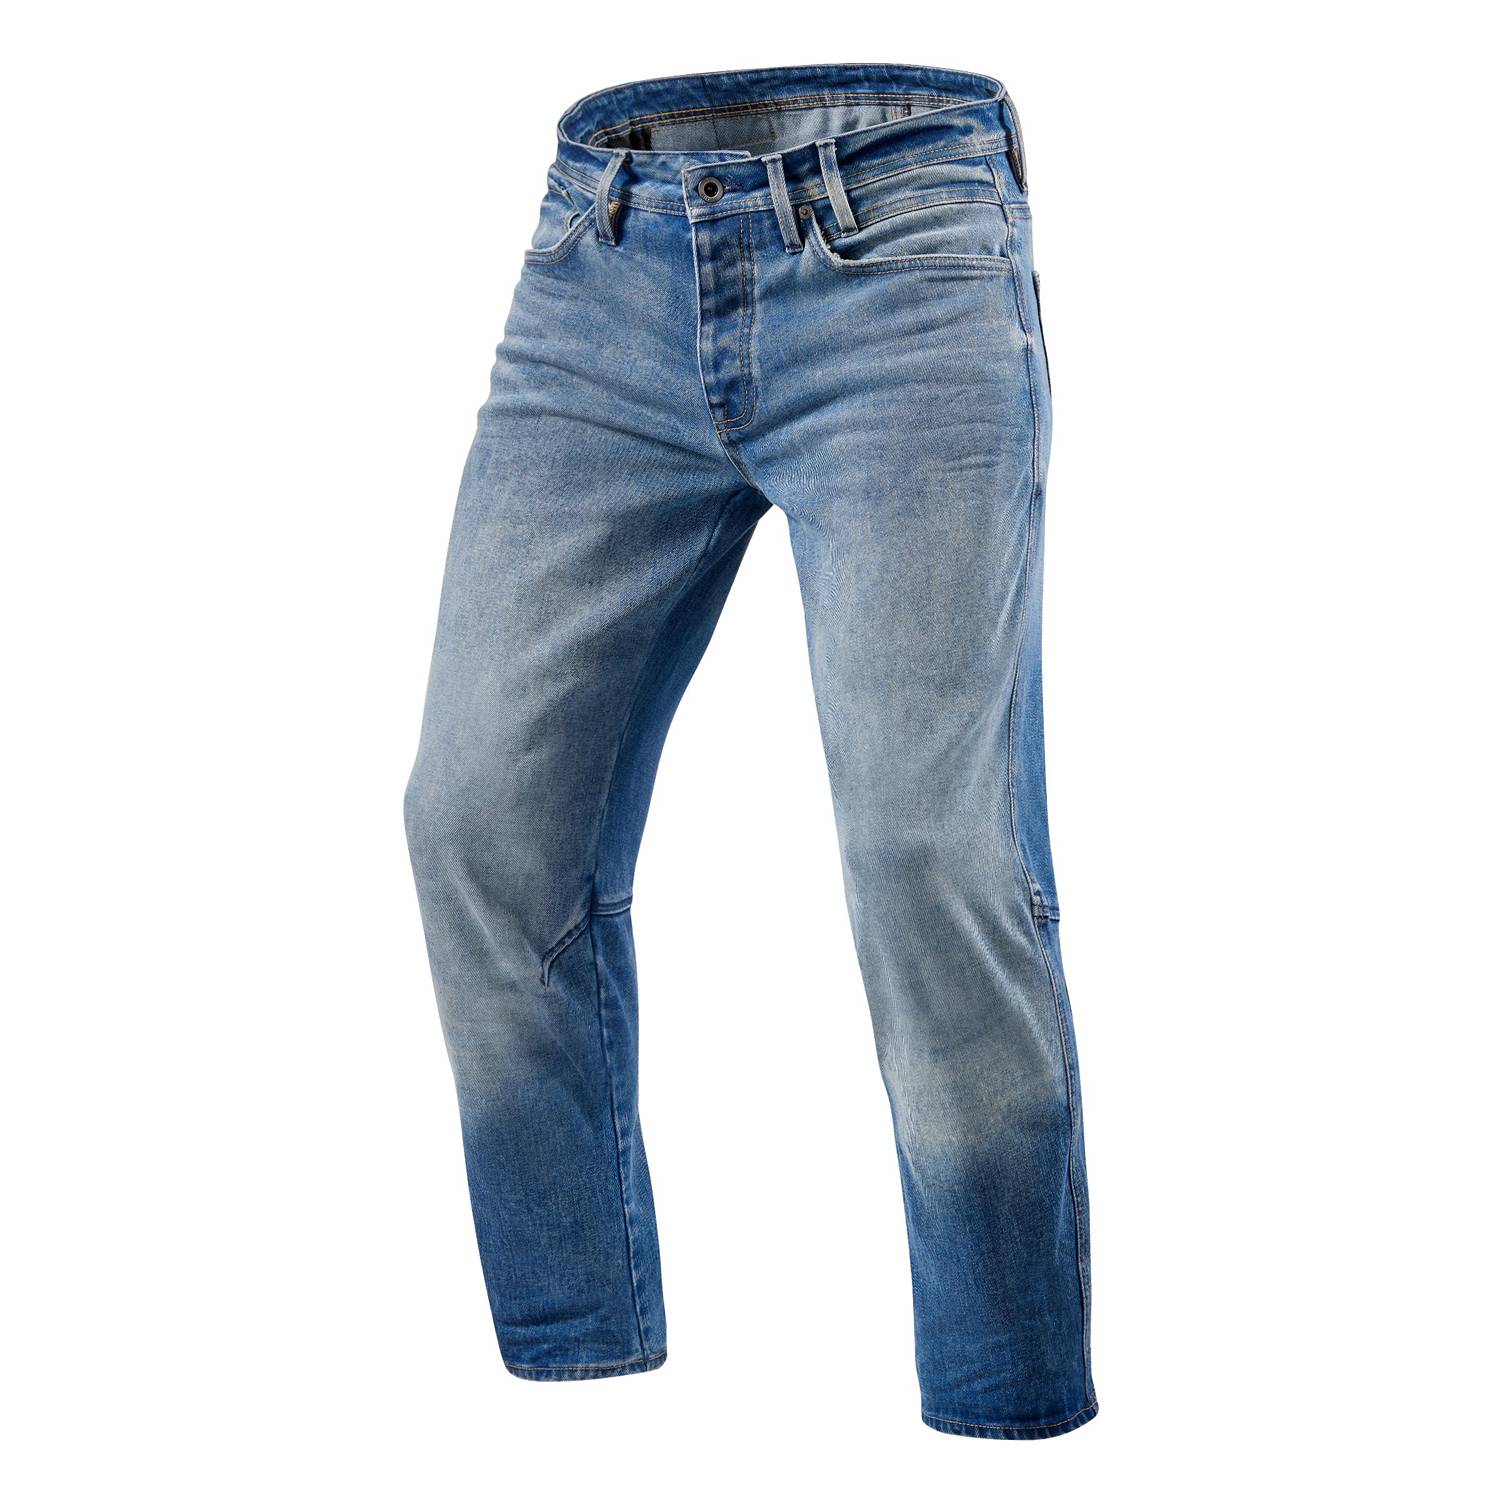 Image of REV'IT! Salt TF Mid Blue Used Motorcycle Jeans Talla L34/W33